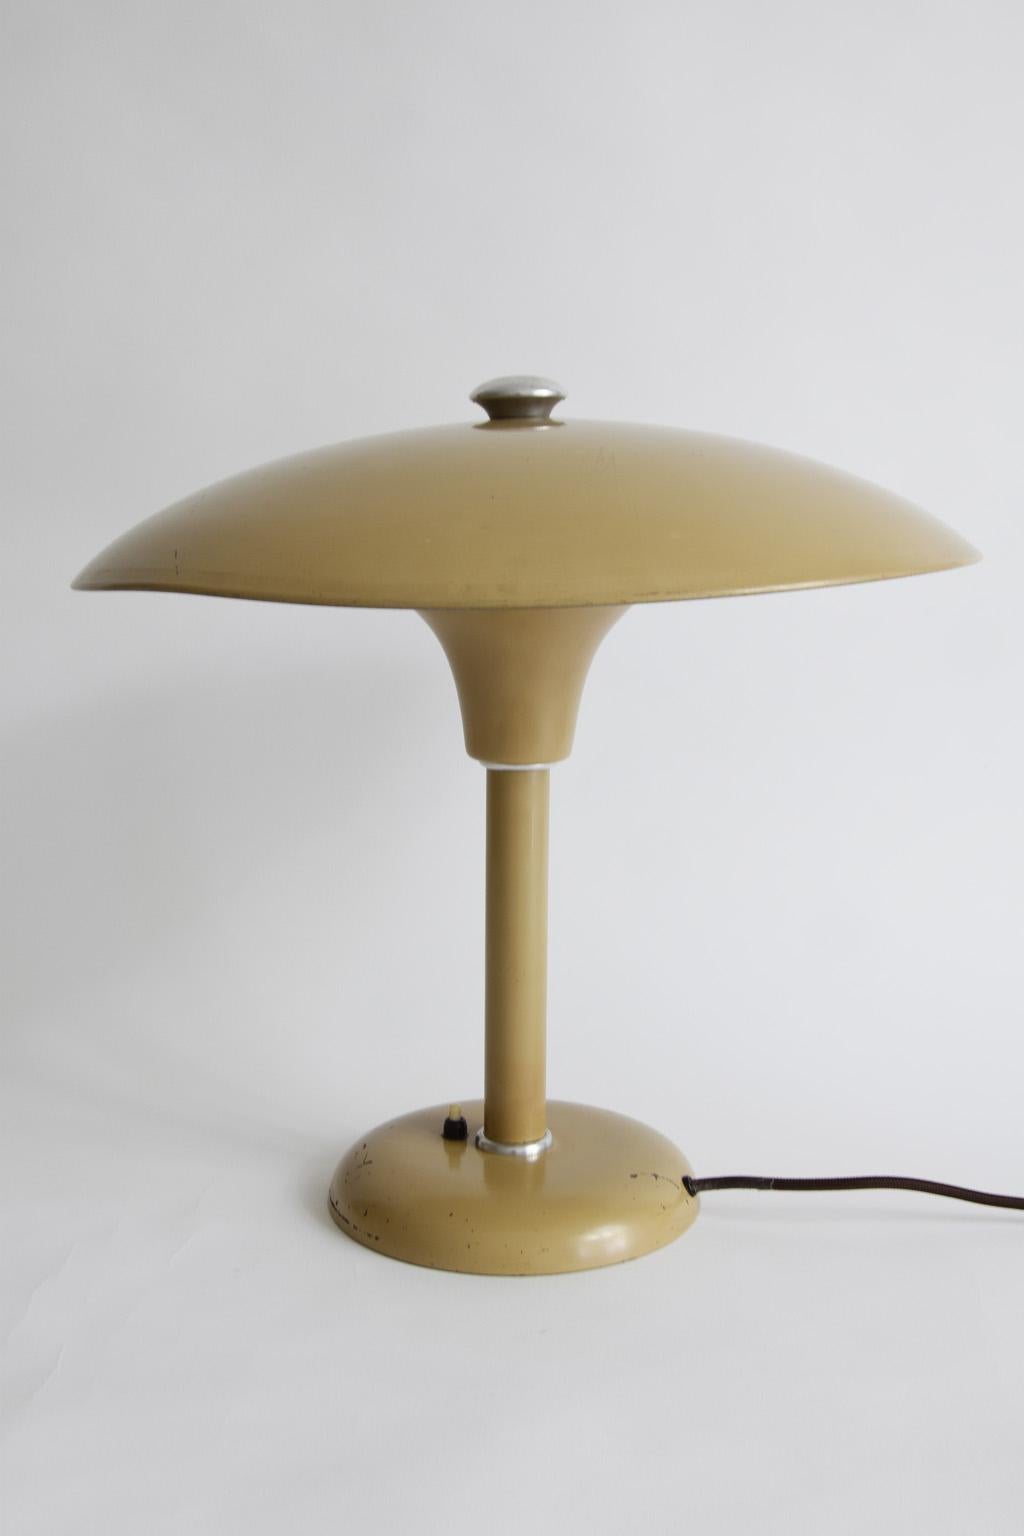 Table Lamp by Max Schumacher for Werner Schröder Bauhaus, Germany, 1934 In Good Condition For Sale In Nürnberg, Bavaria